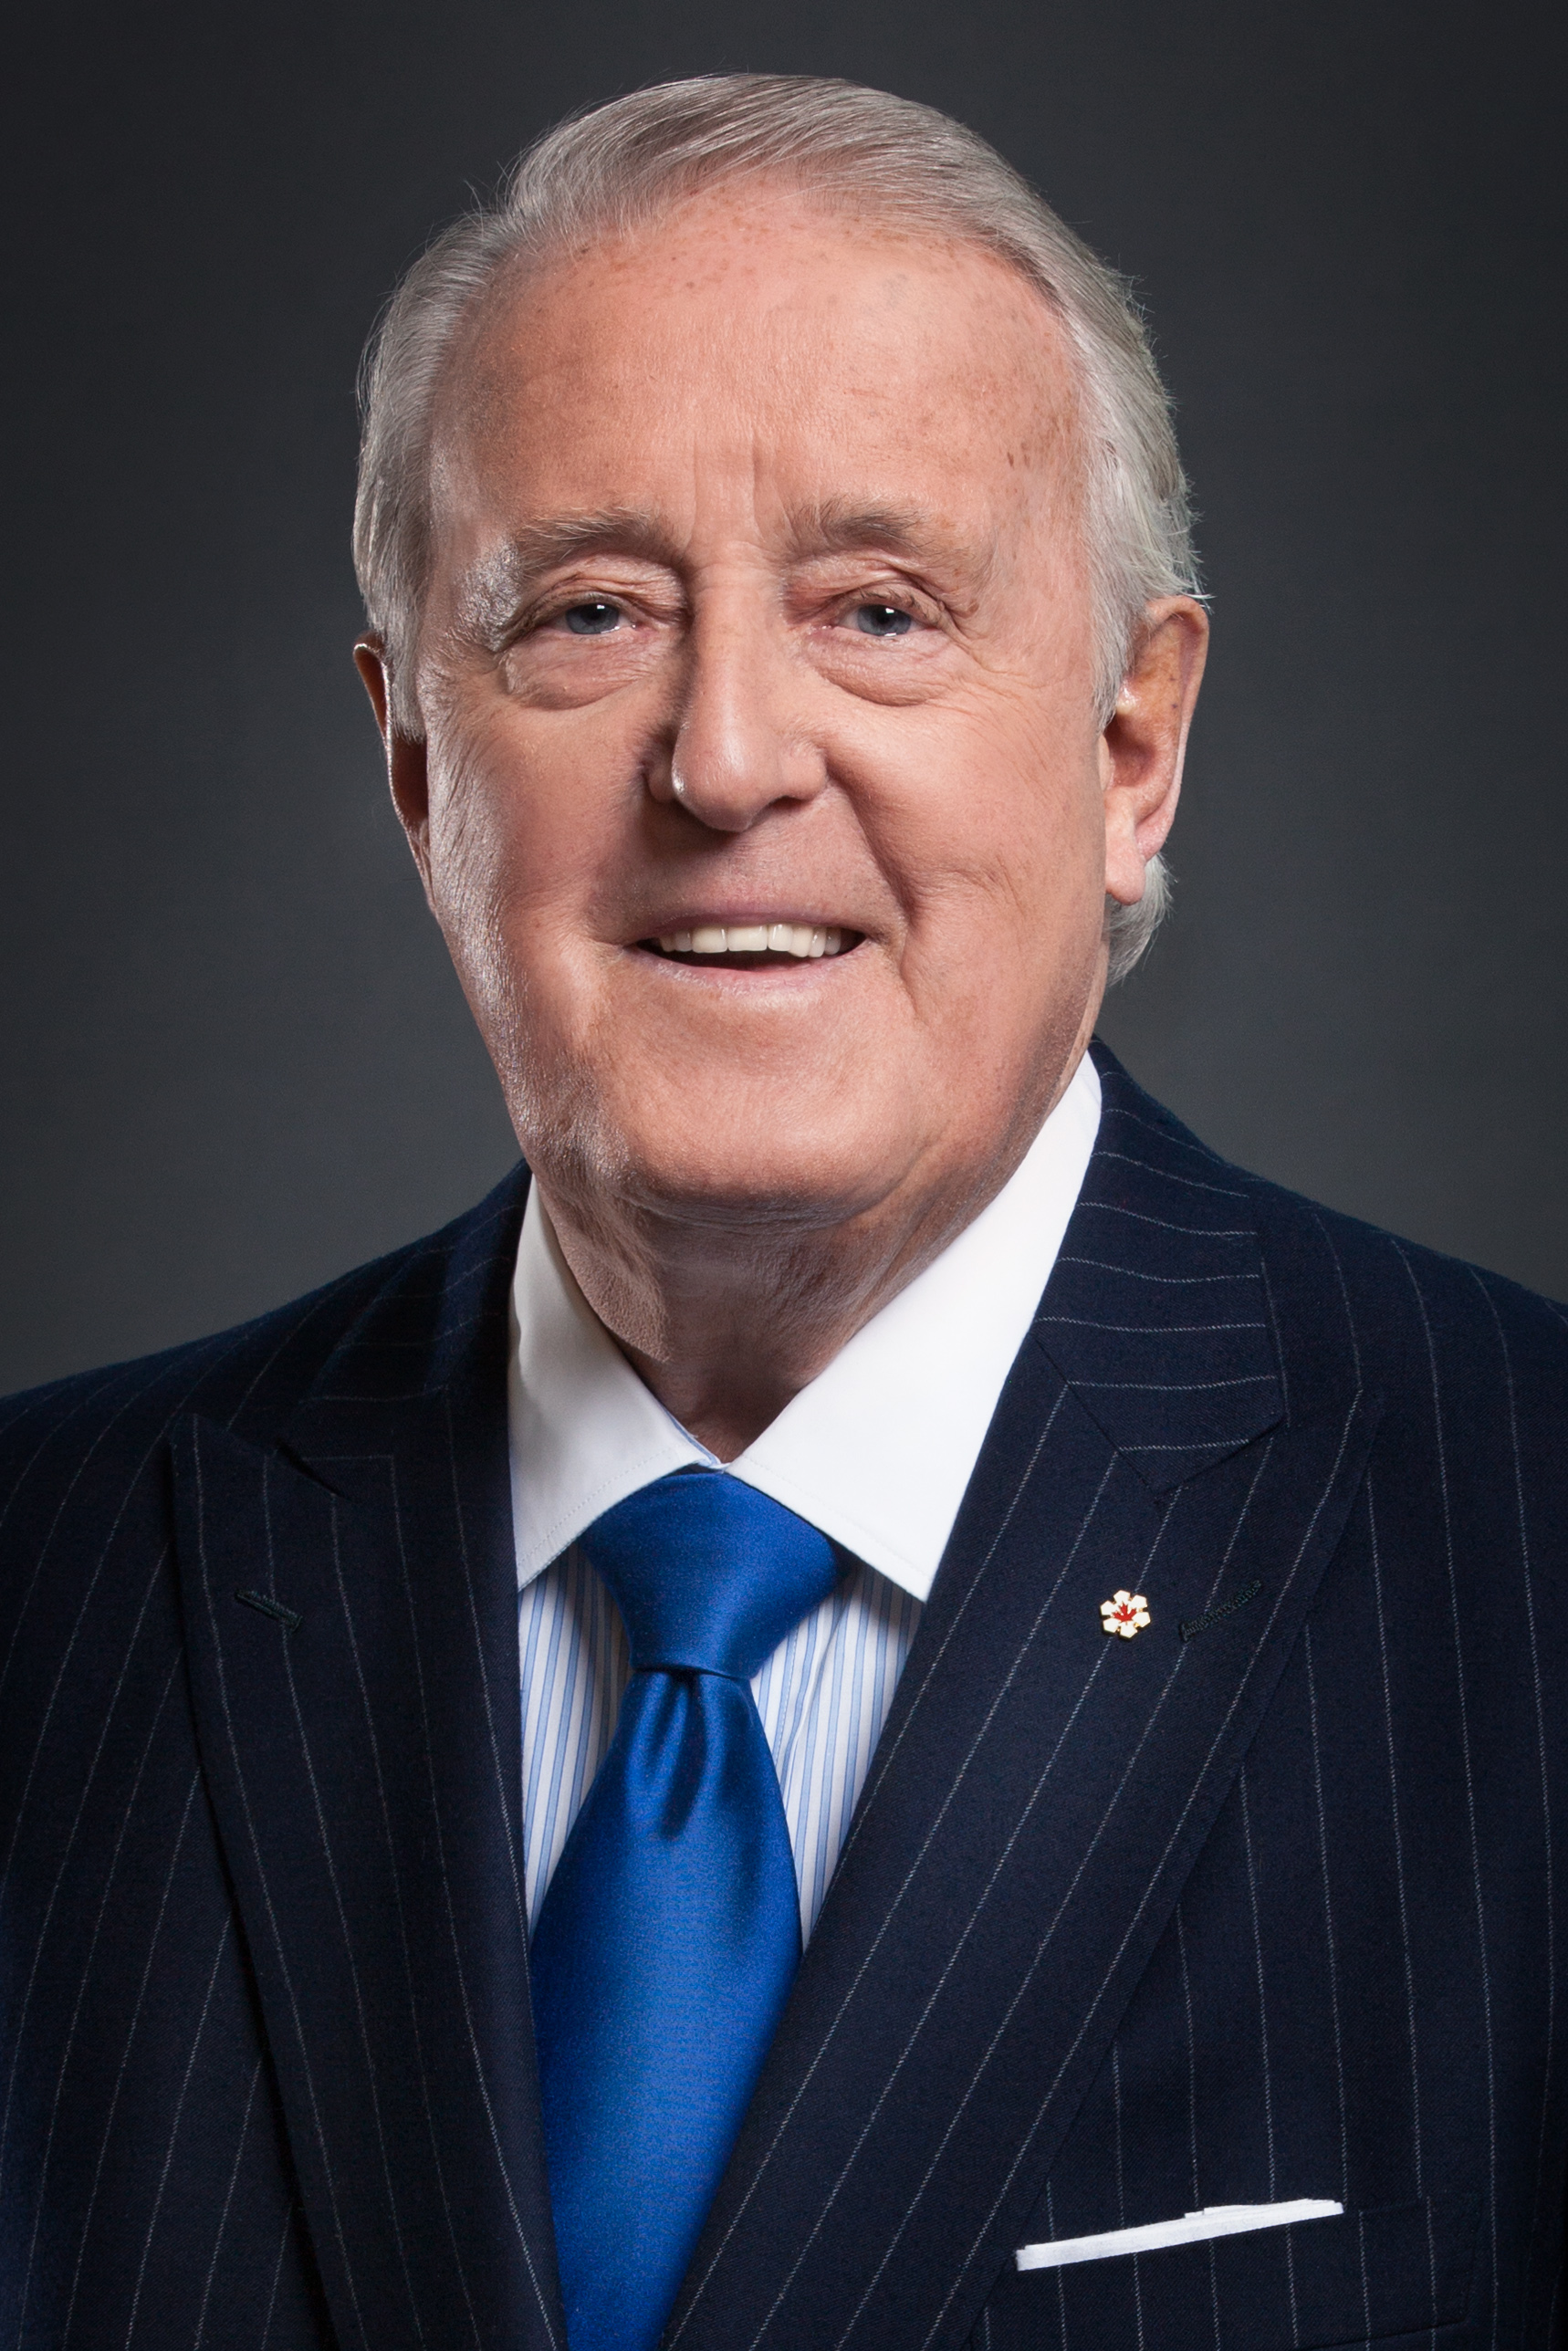 The late Mr. Brian Mulroney, former Prime Minister of Canada